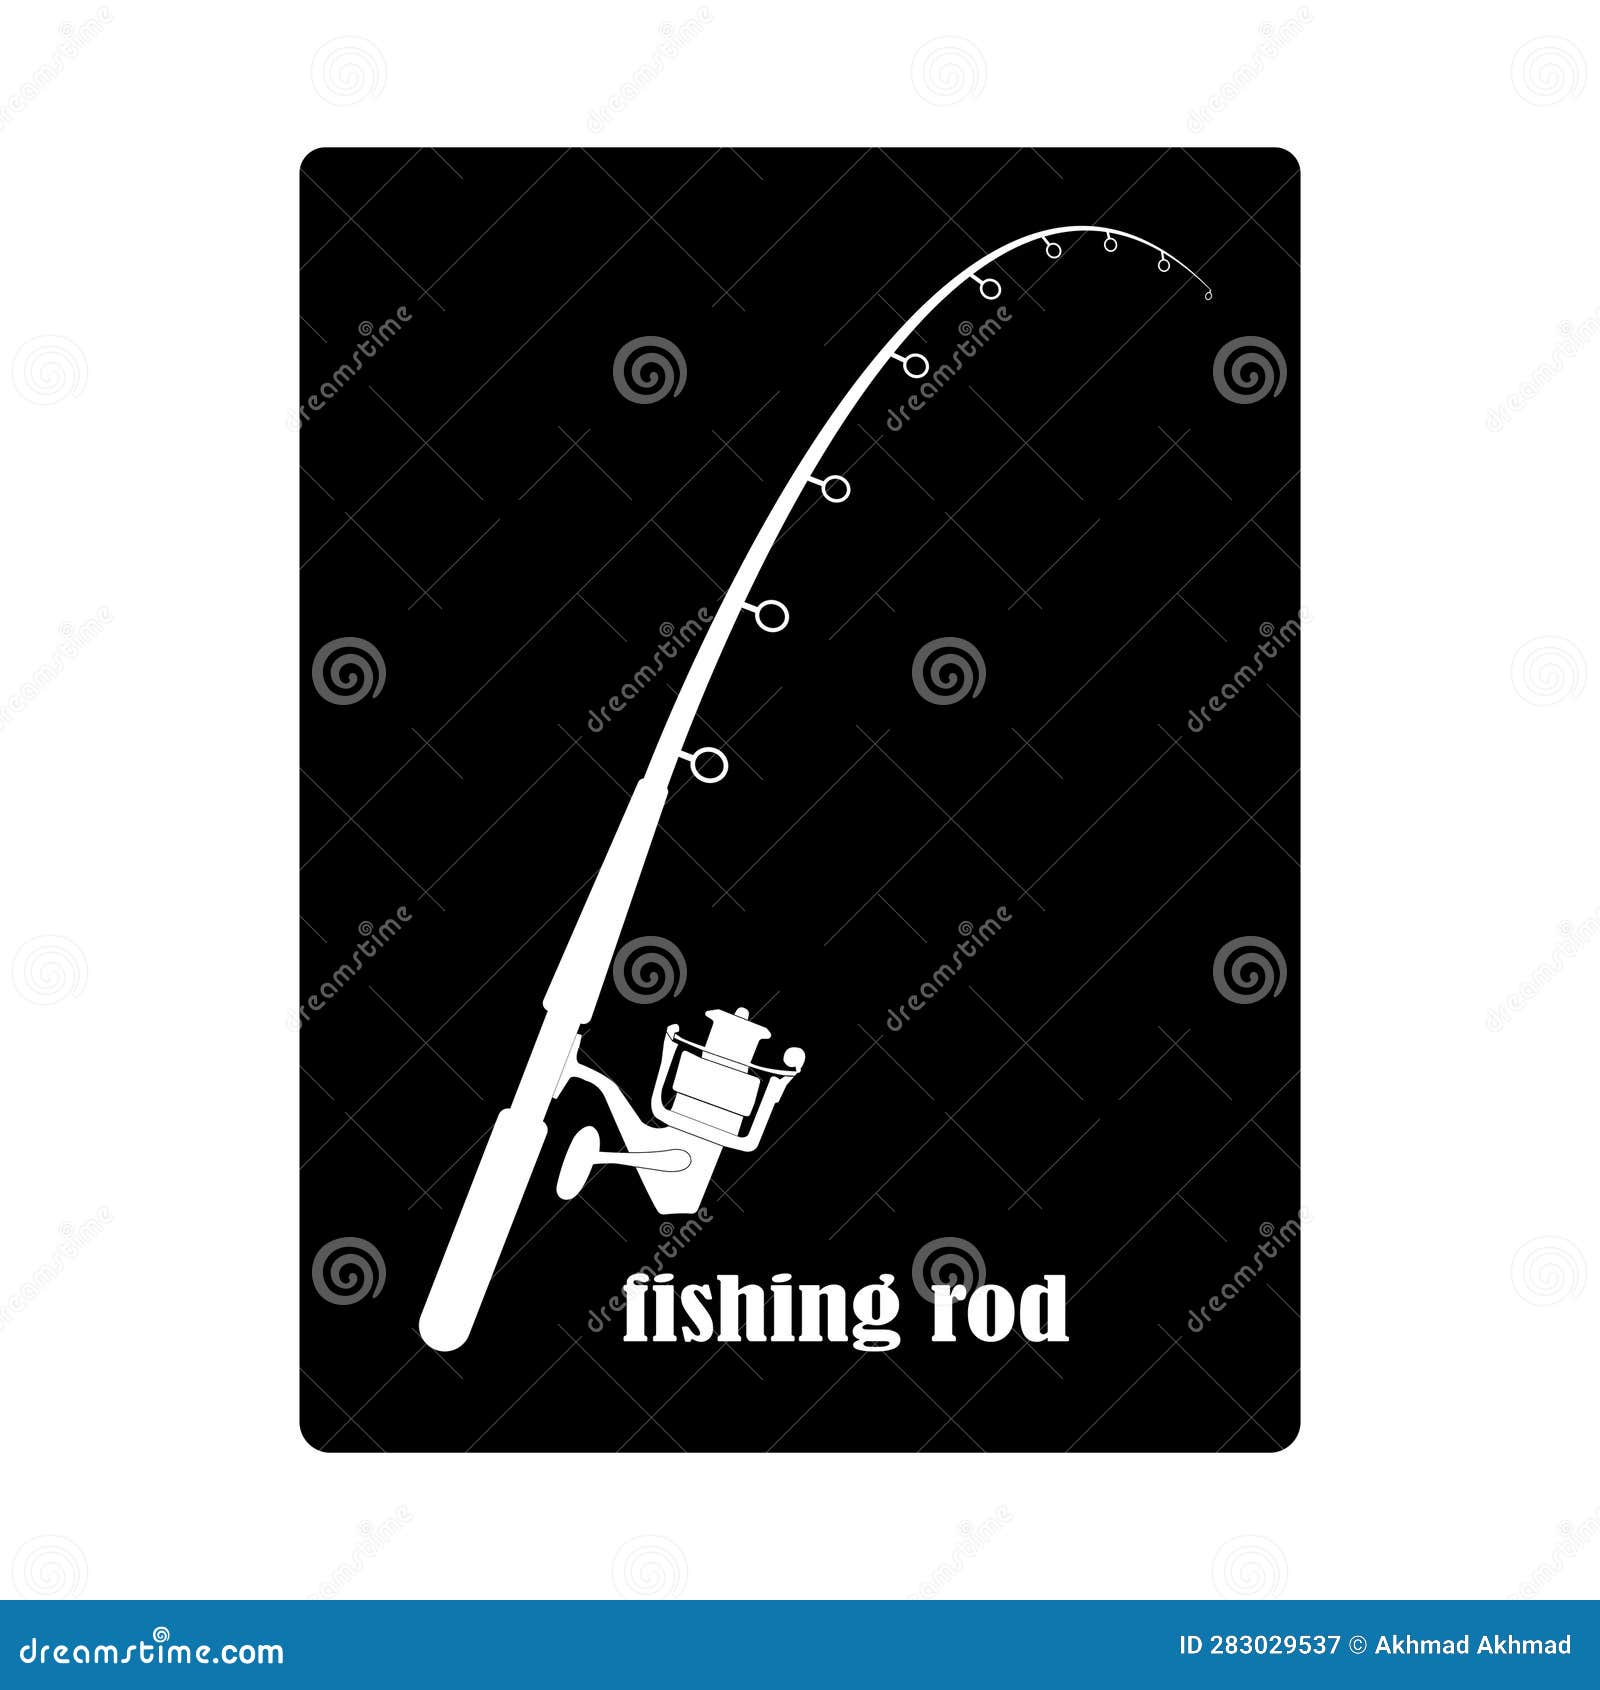 https://thumbs.dreamstime.com/z/fishing-rod-icon-fishing-rod-icon-vector-simple-design-283029537.jpg